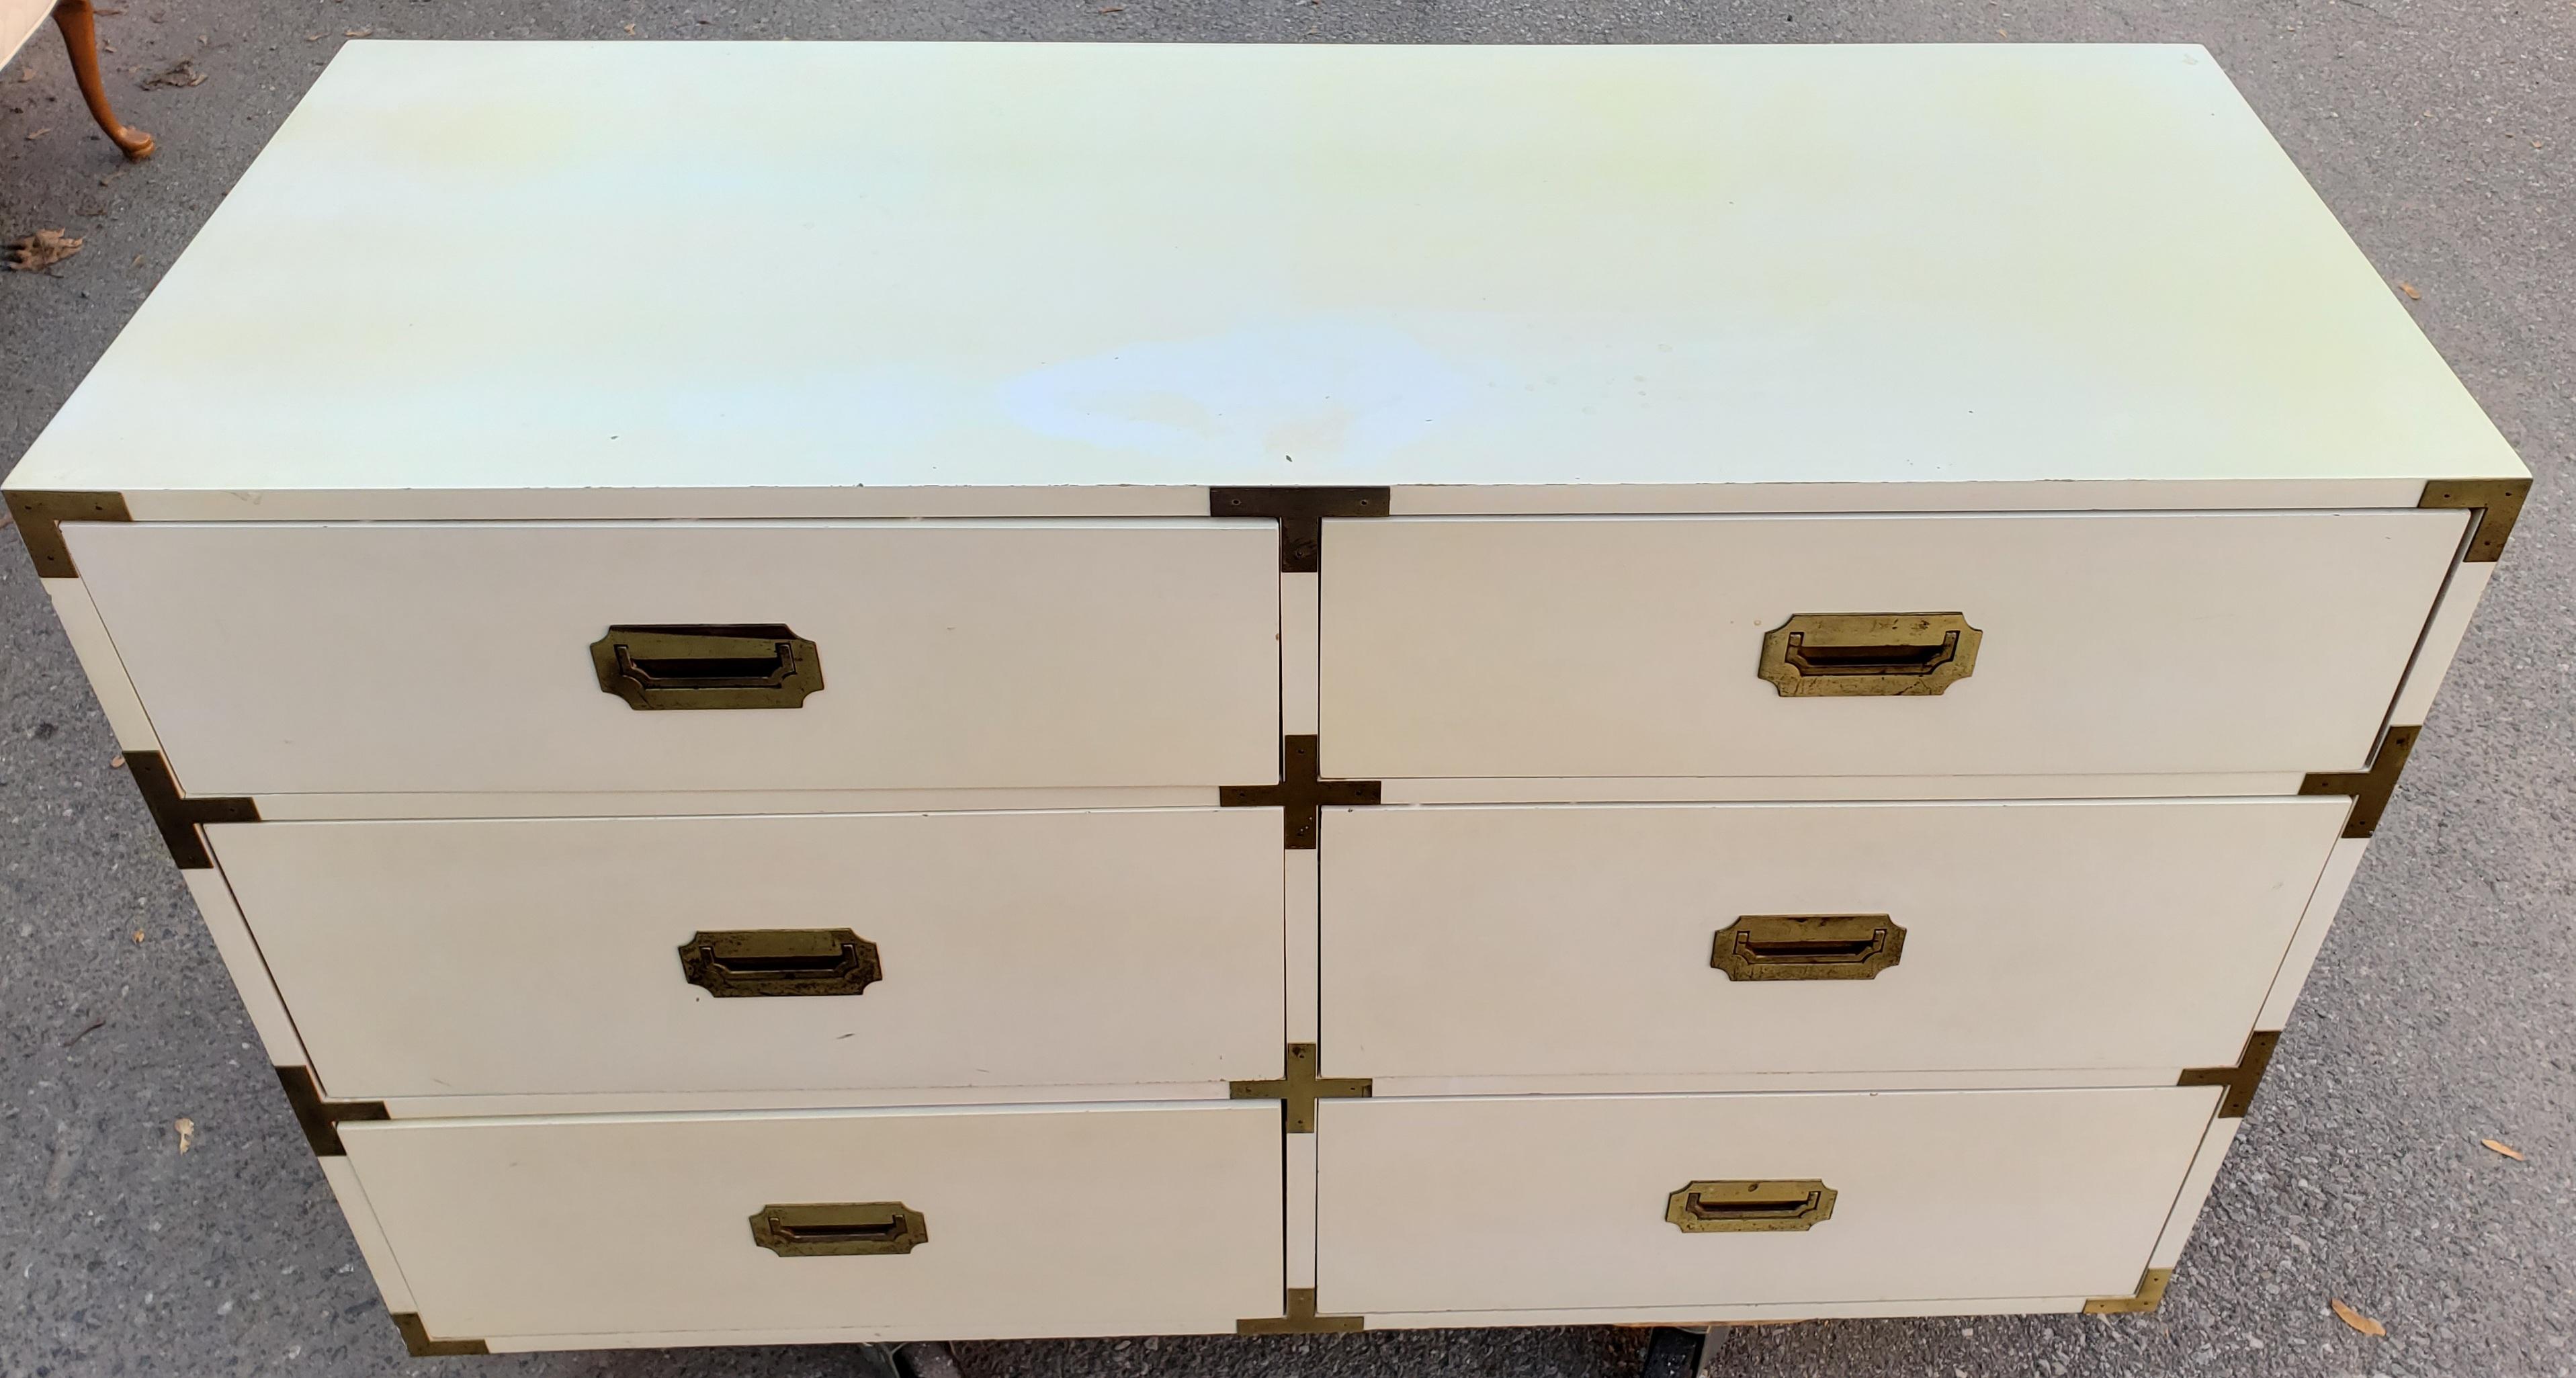 This 6-drawer campaign chest was part of the Swingers Collection by Schoolfield Industries, circa 1970s. It has an antique white paint satin finish with brass hardware. All of the hardware is original and showing some signs of aging appropriate with